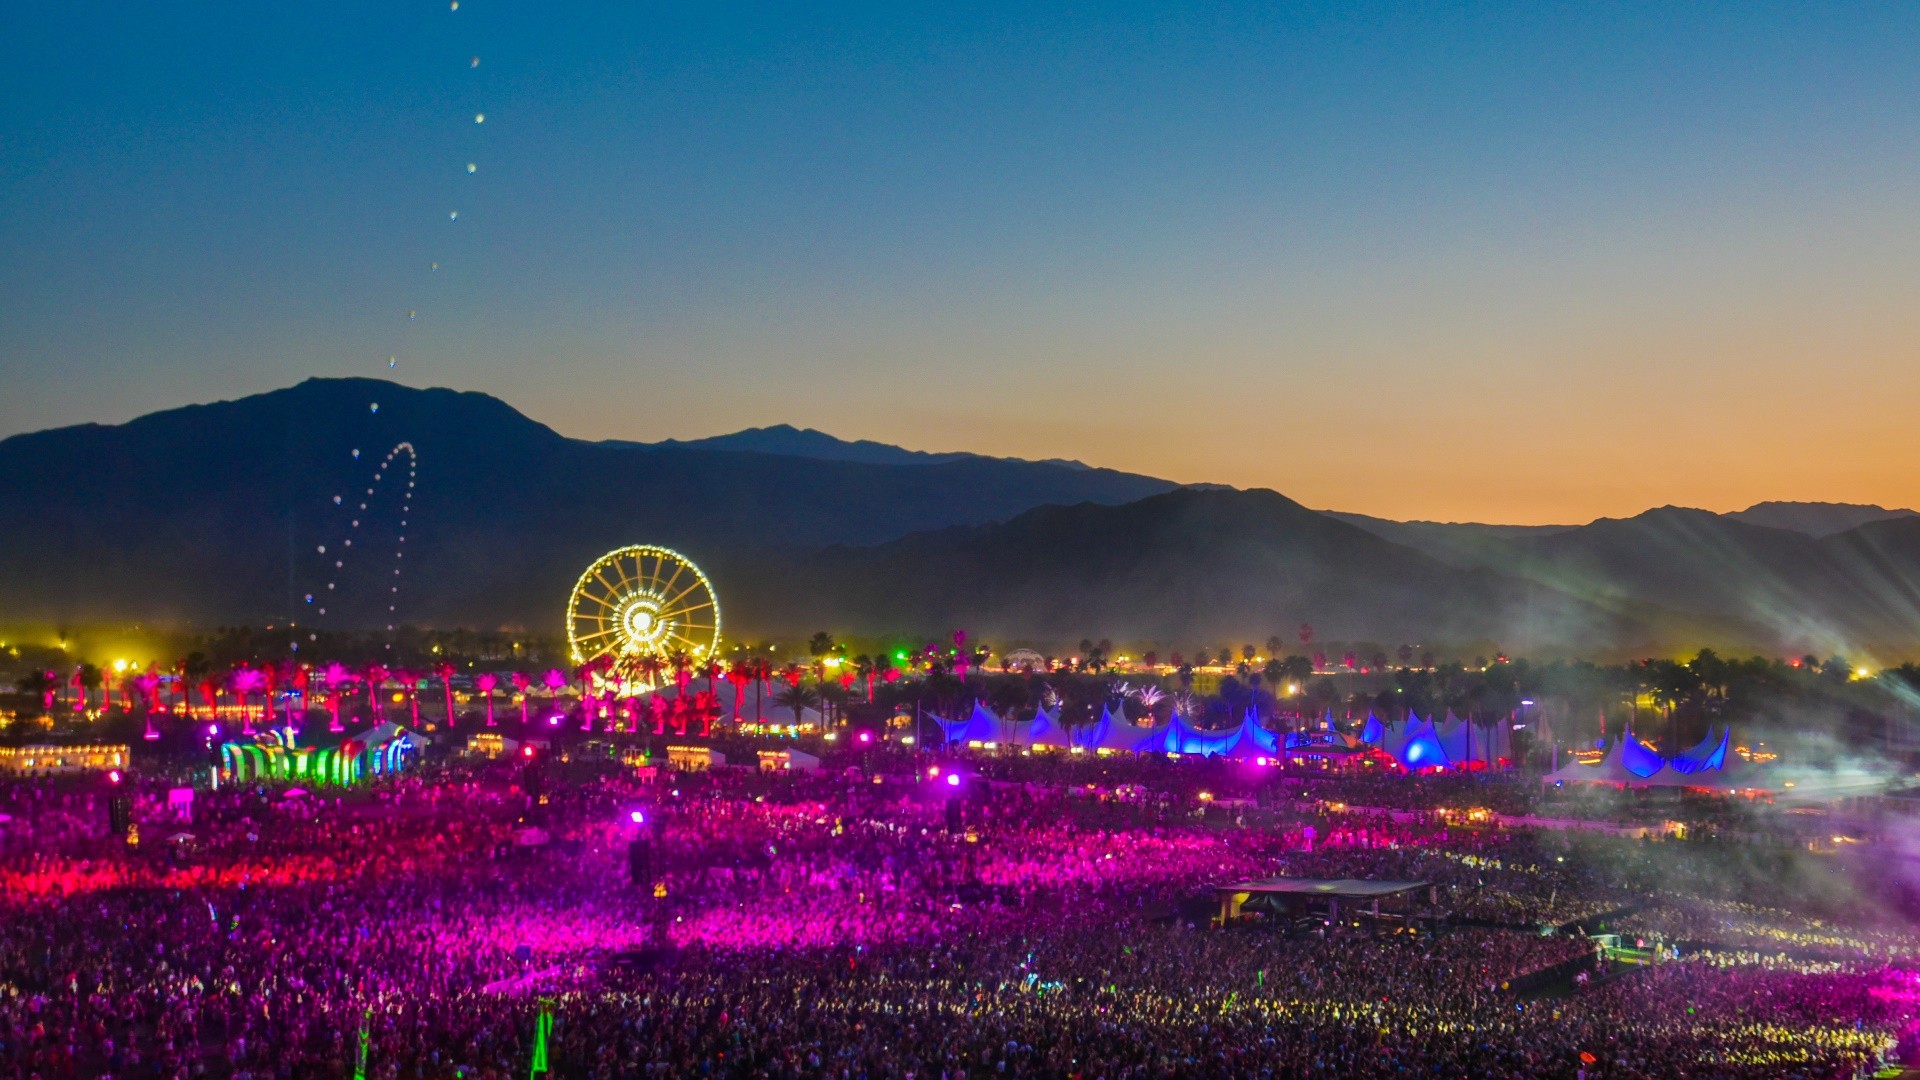 Wallpaper HD Coachella 2019 with high-resolution 1920x1080 pixel. You can use this wallpaper for your Desktop Computer Backgrounds, Mac Wallpapers, Android Lock screen or iPhone Screensavers and another smartphone device